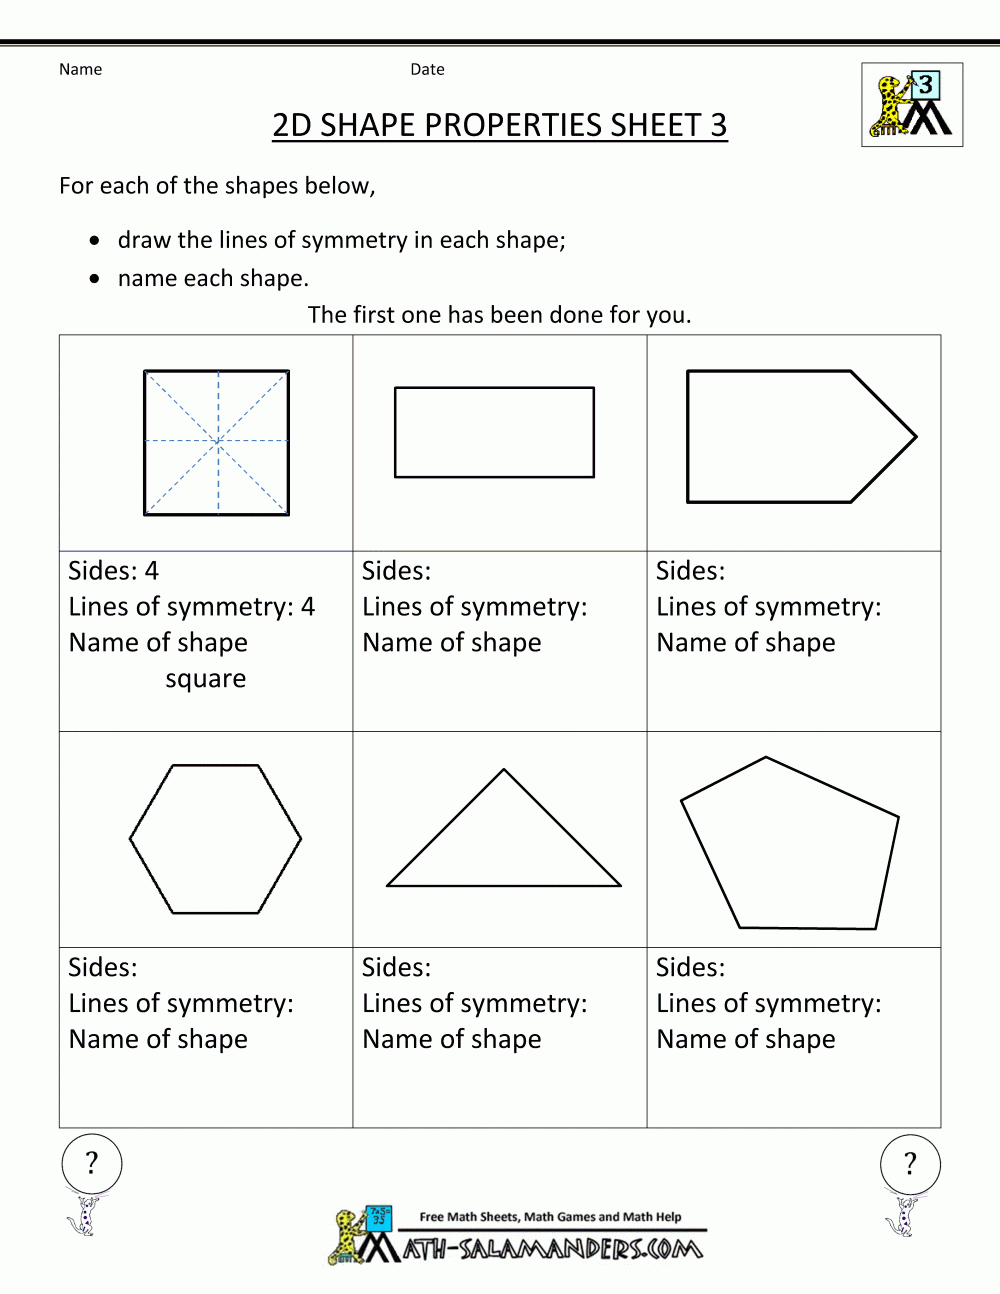 3Rd Grade Geometry Worksheets throughout Free Printable Geometry Worksheets For 3Rd Grade